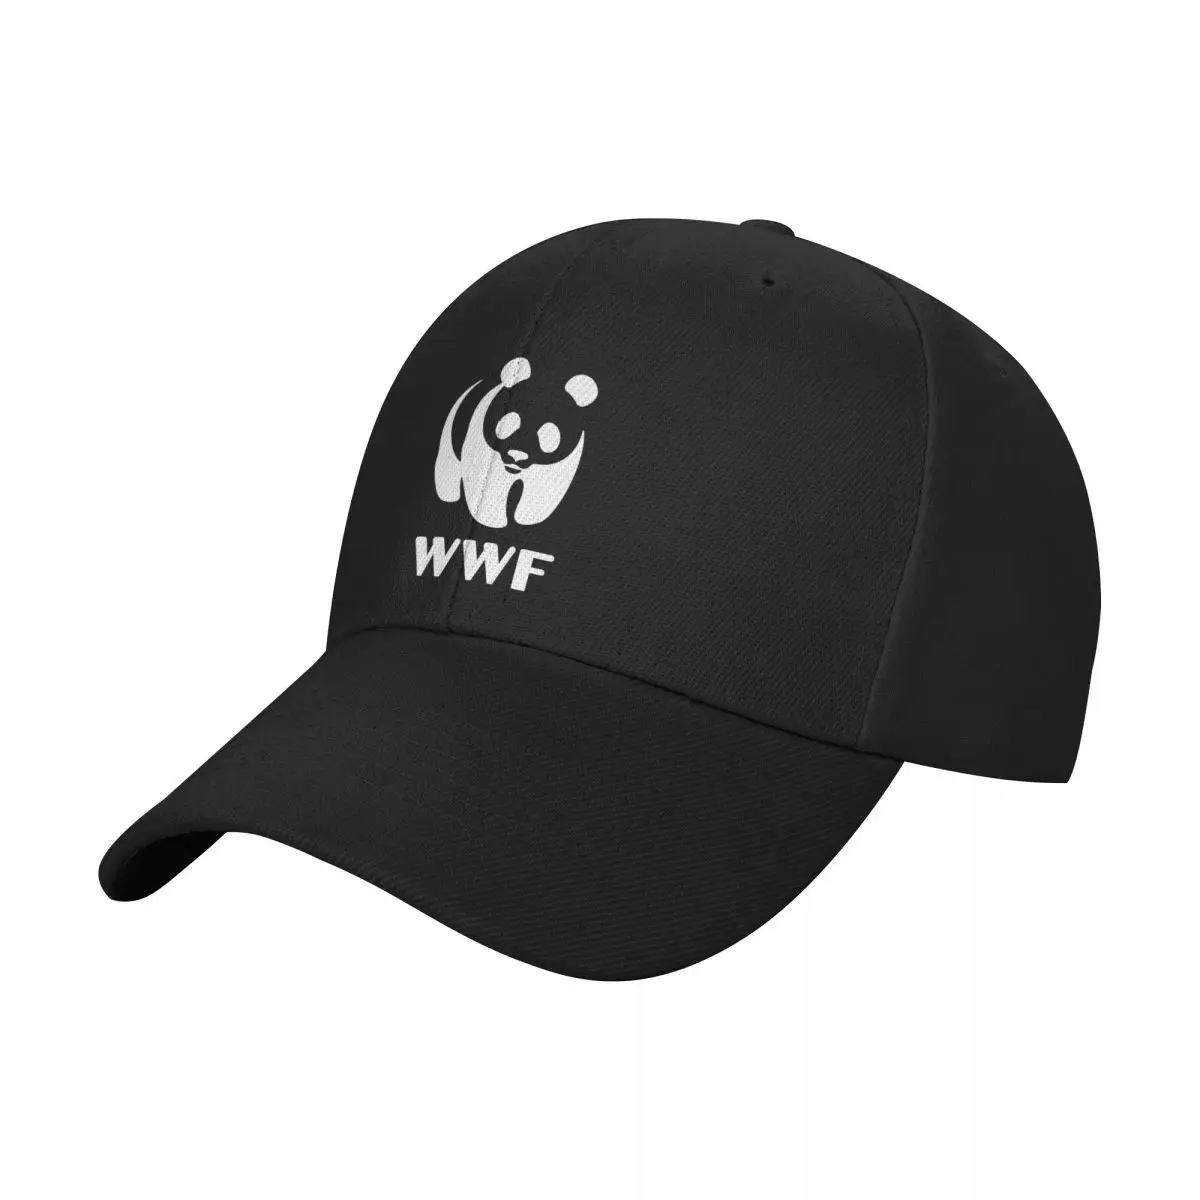 

World Wide Fund For Nature WWF Baseball Cap Casquette Unisex Hip Hop Claas Adjustable Hats Snapback Cap